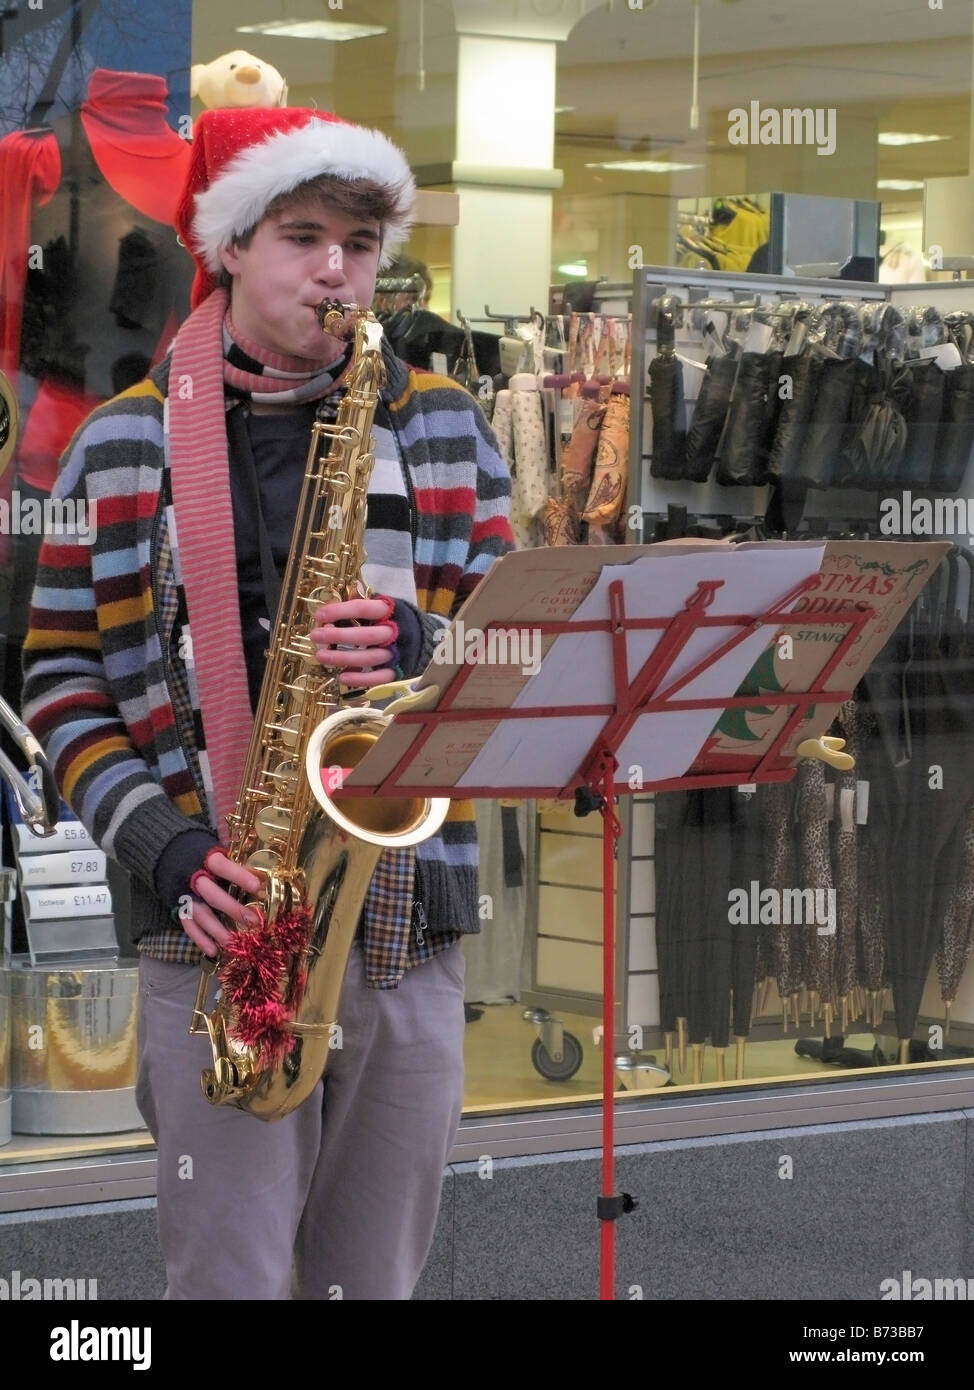 A lad busking money by playing Christmas carols on trombones on the Street of Norwich during Christmas period Stock Photo